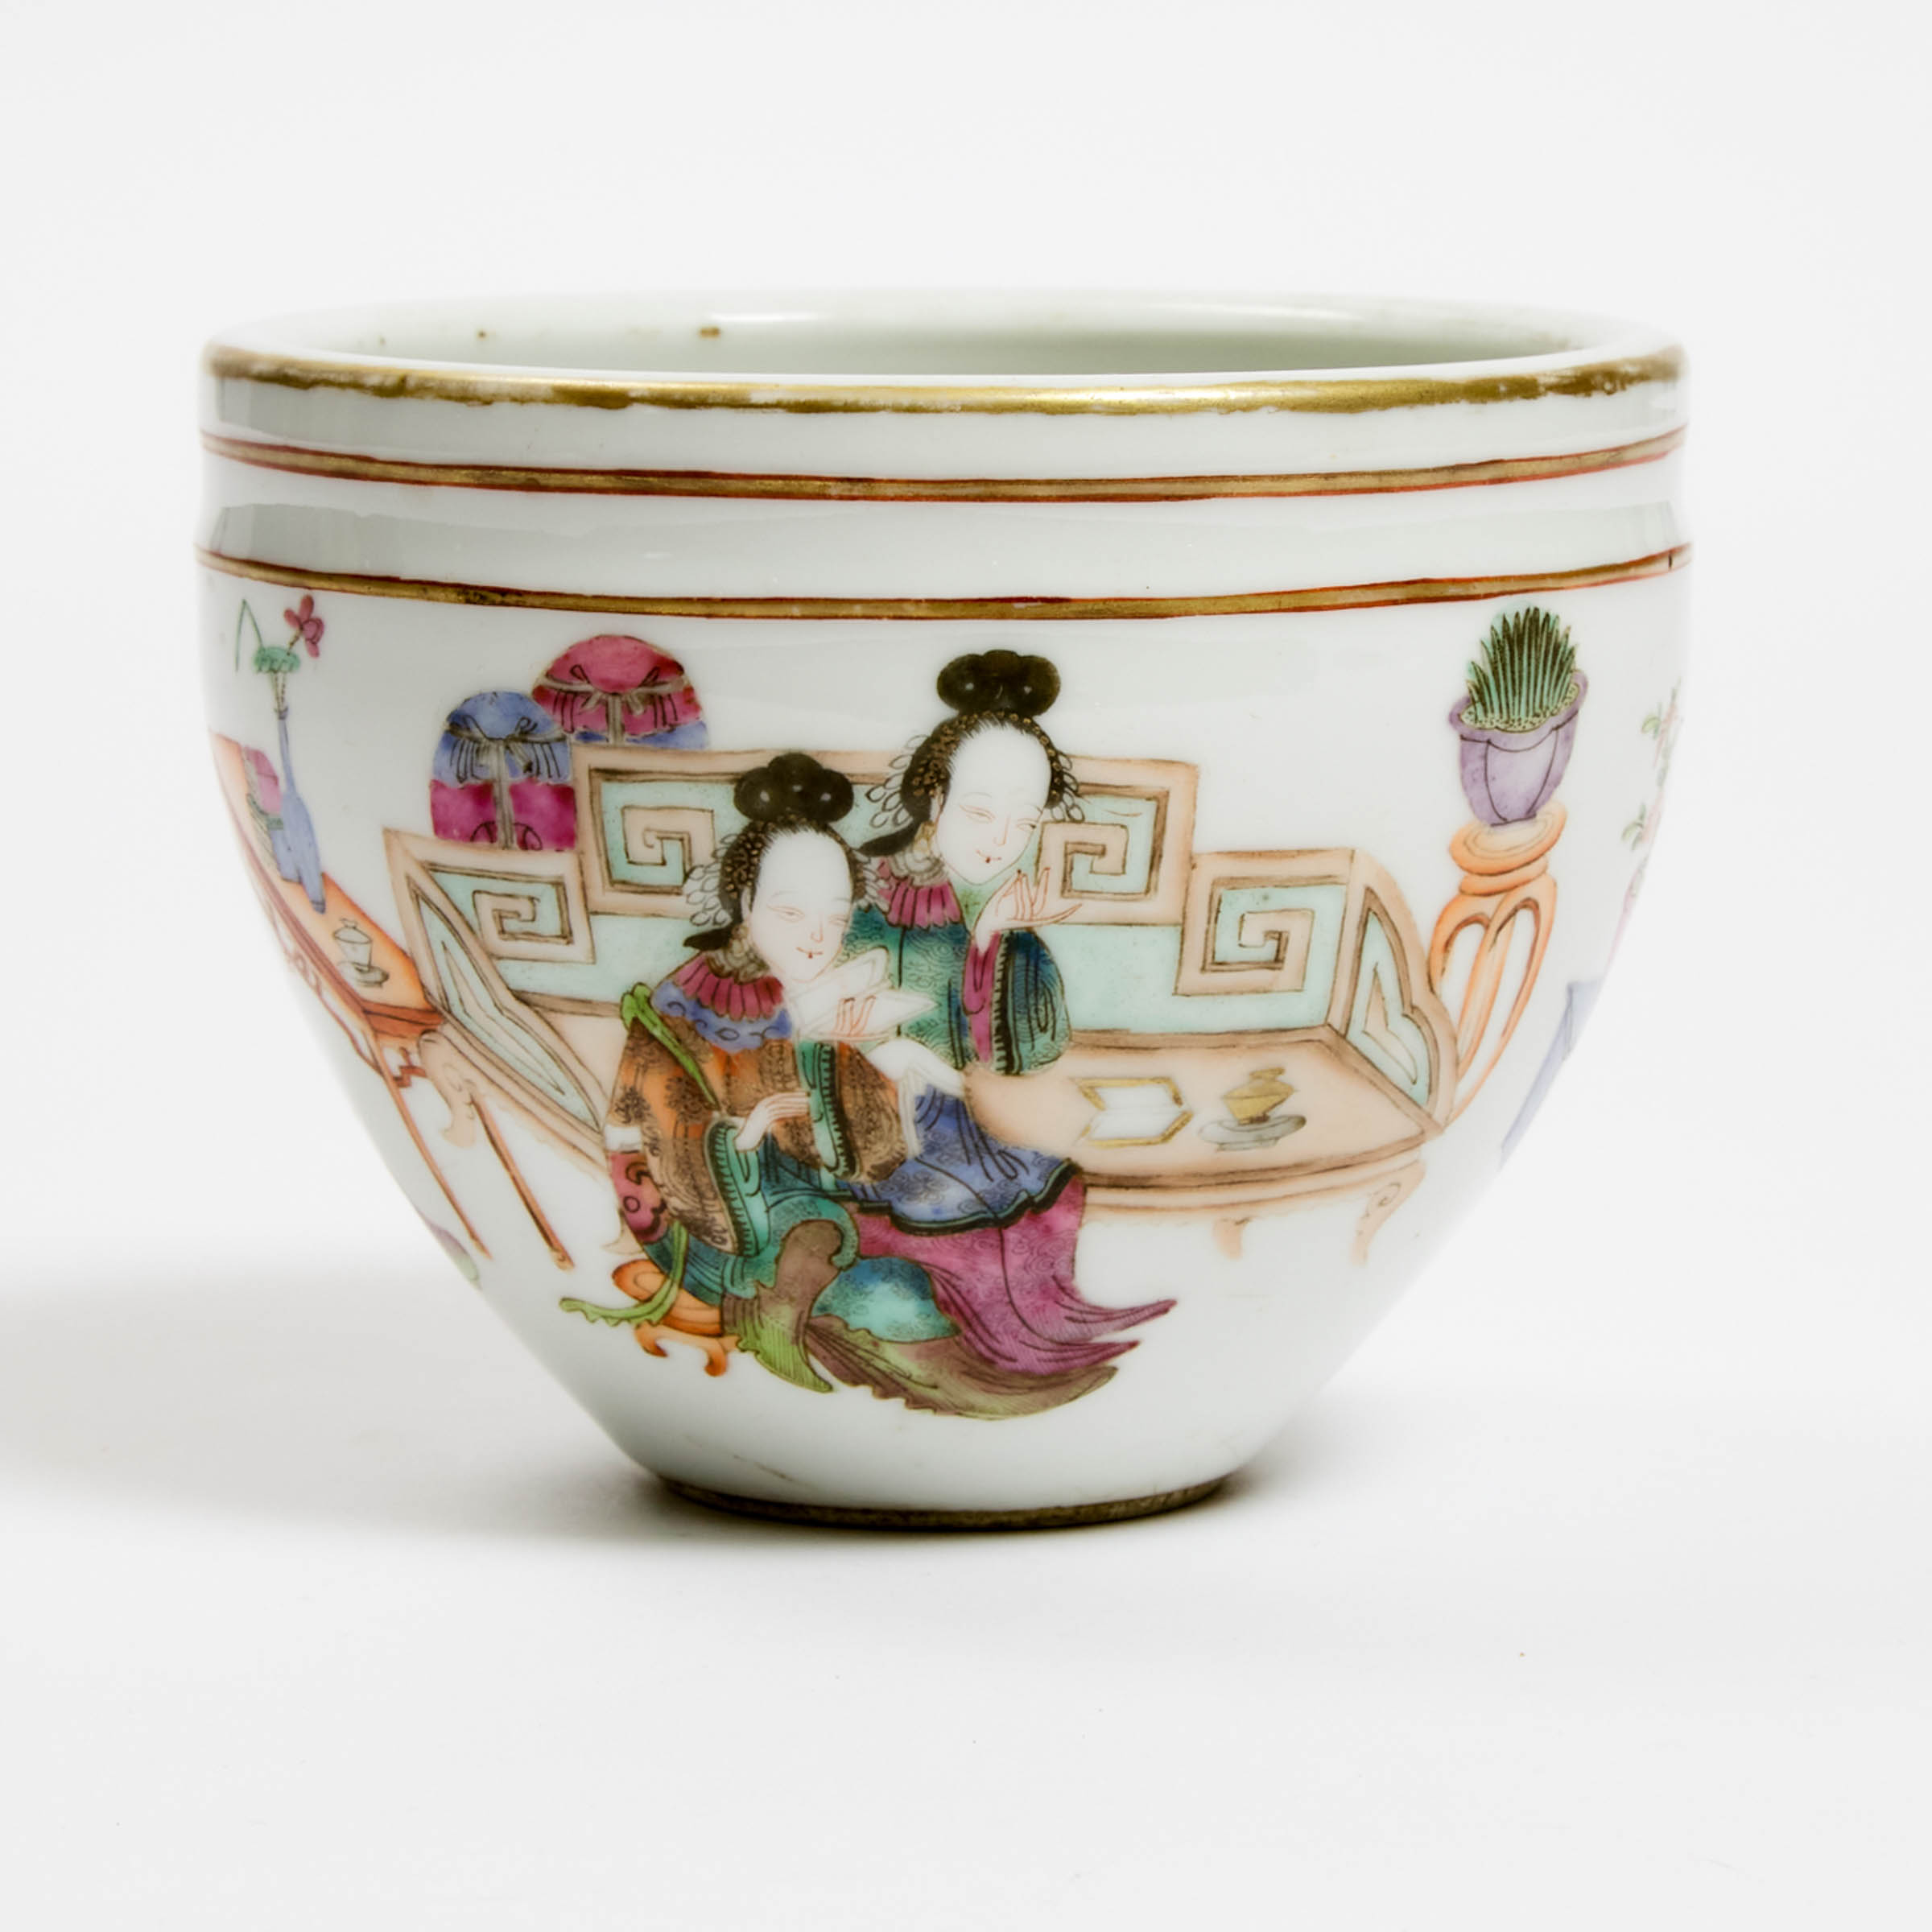 A Small Famille Rose 'Wu Shuang Pu' Jardinière, Daoguang Mark and Period (1821-1850)